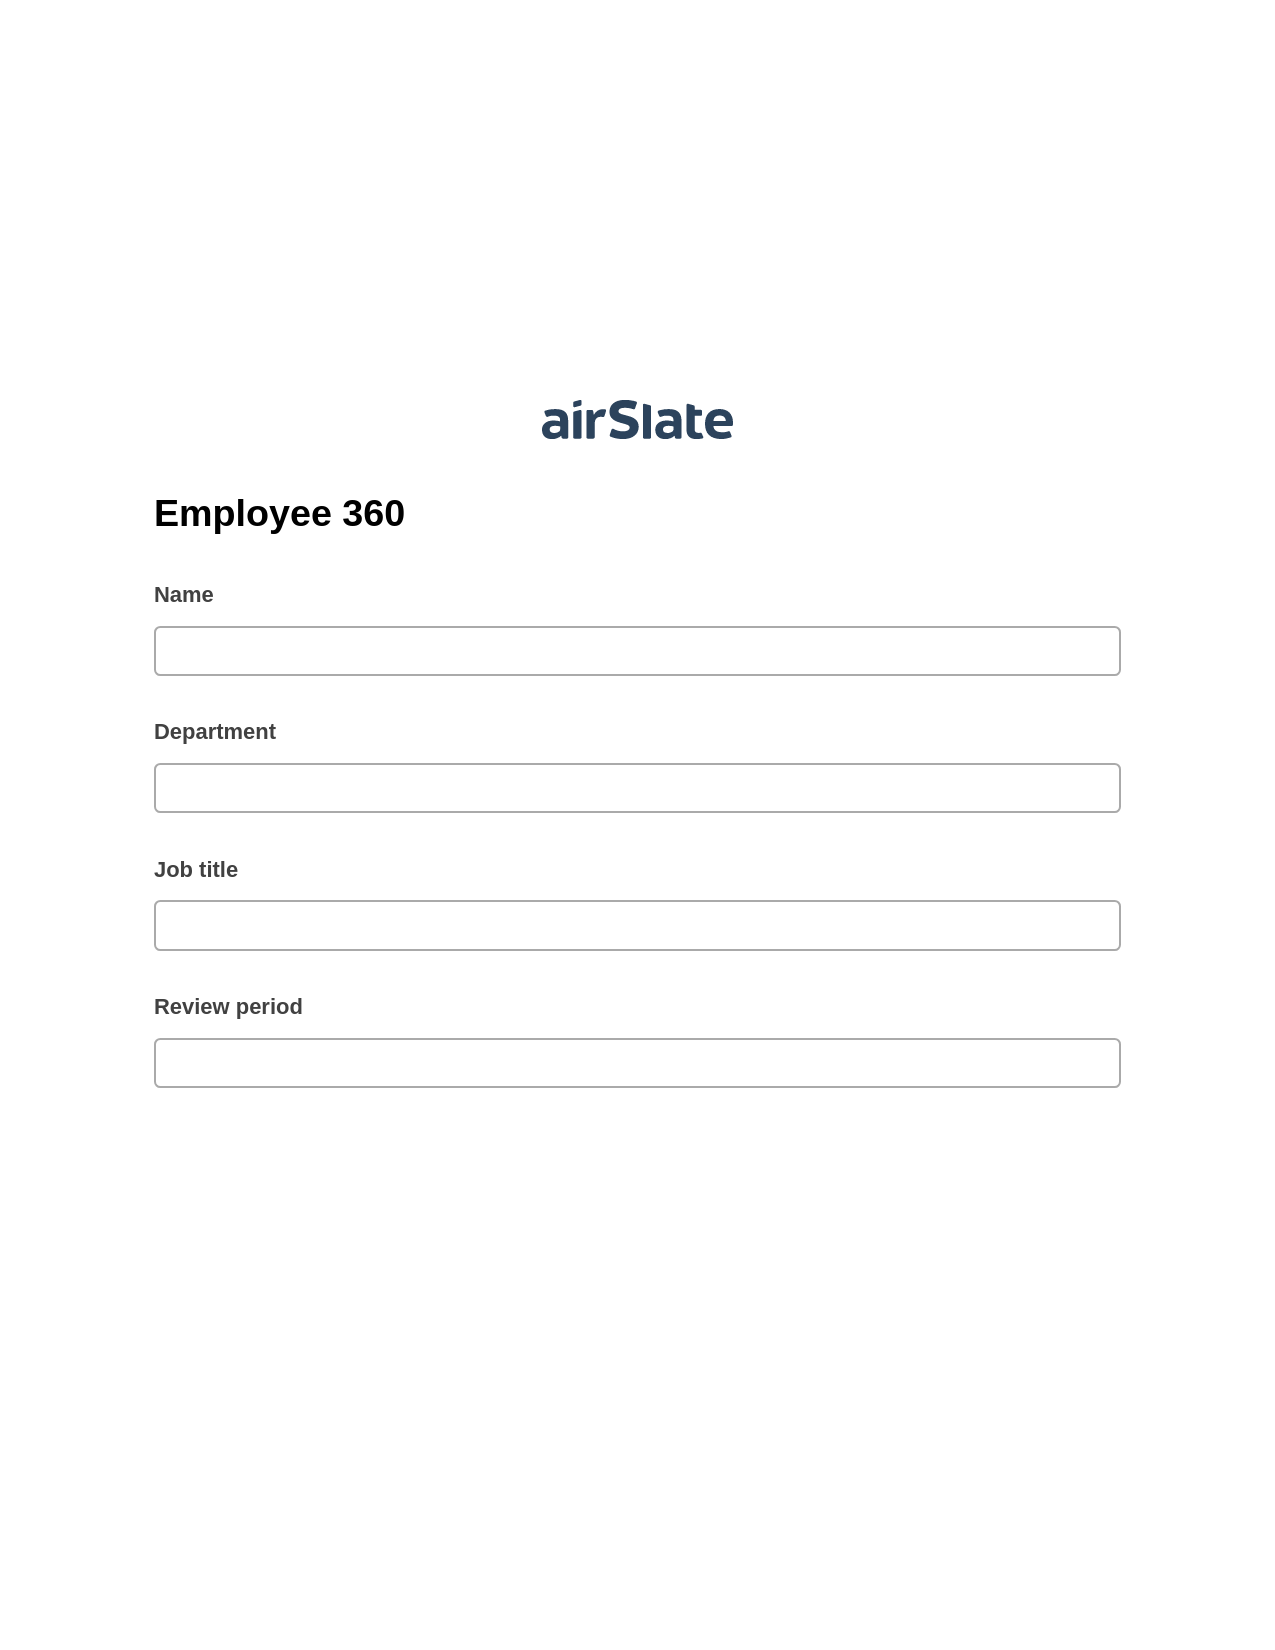 Employee 360 Pre-fill Document Bot, Update MS Dynamics 365 Record Bot, Archive to SharePoint Folder Bot